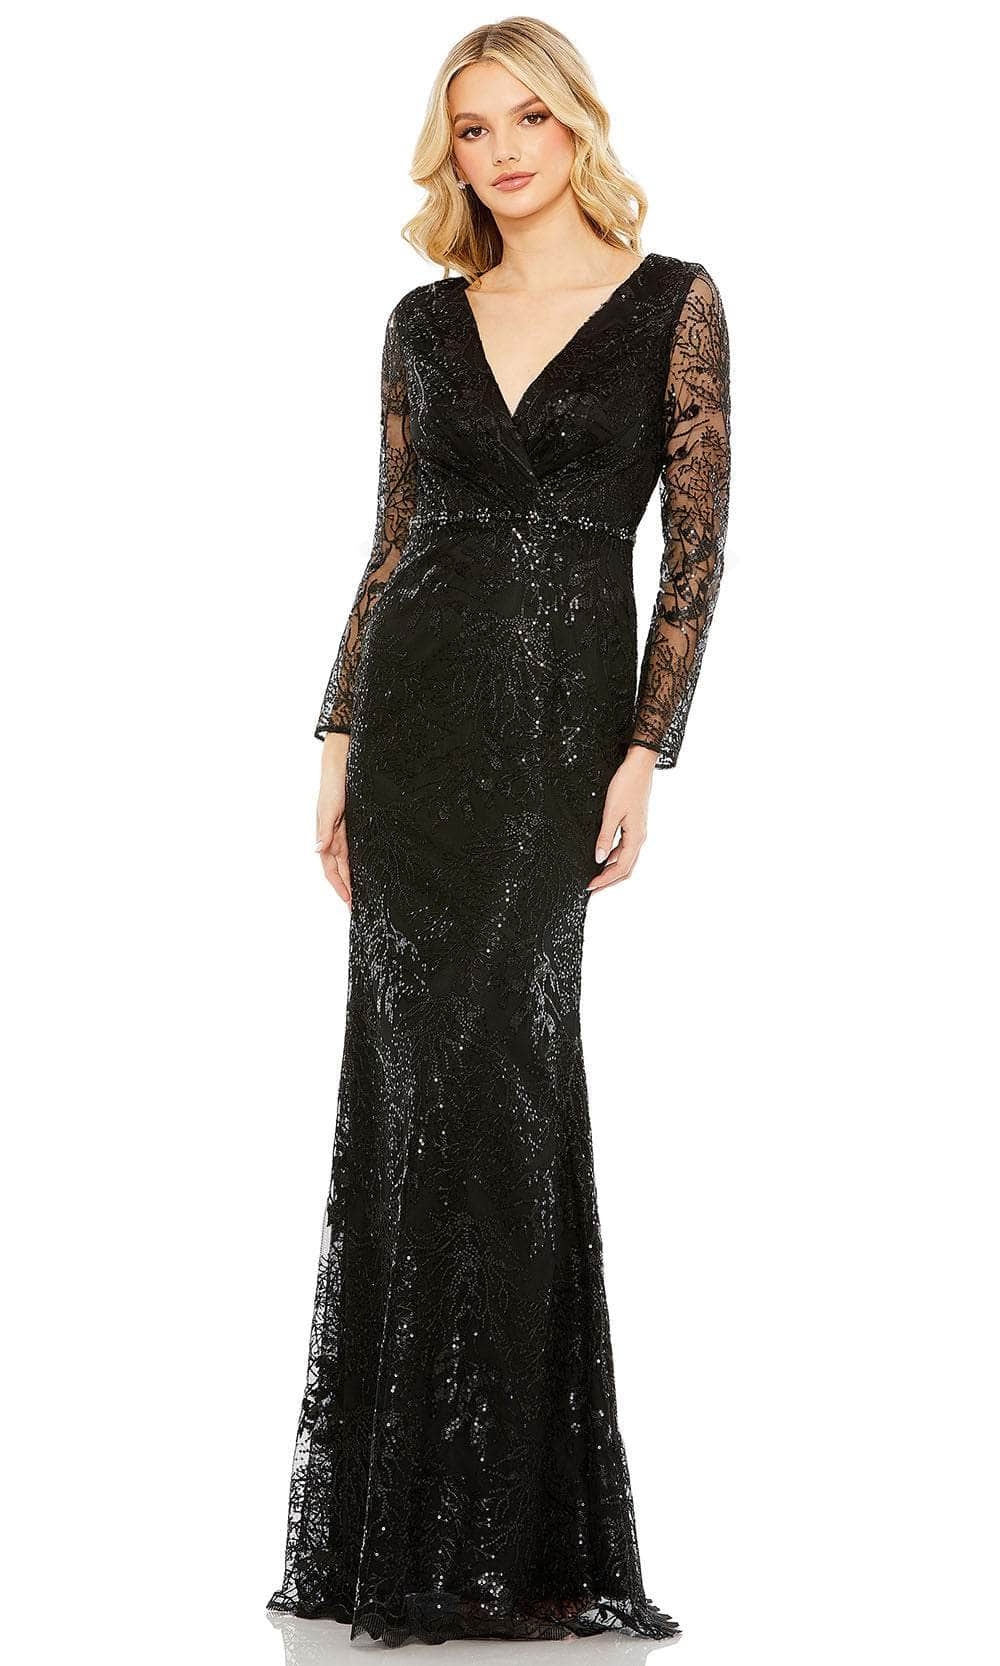 Image of Mac Duggal 68016 - Long Sleeve Embellished Evening Gown